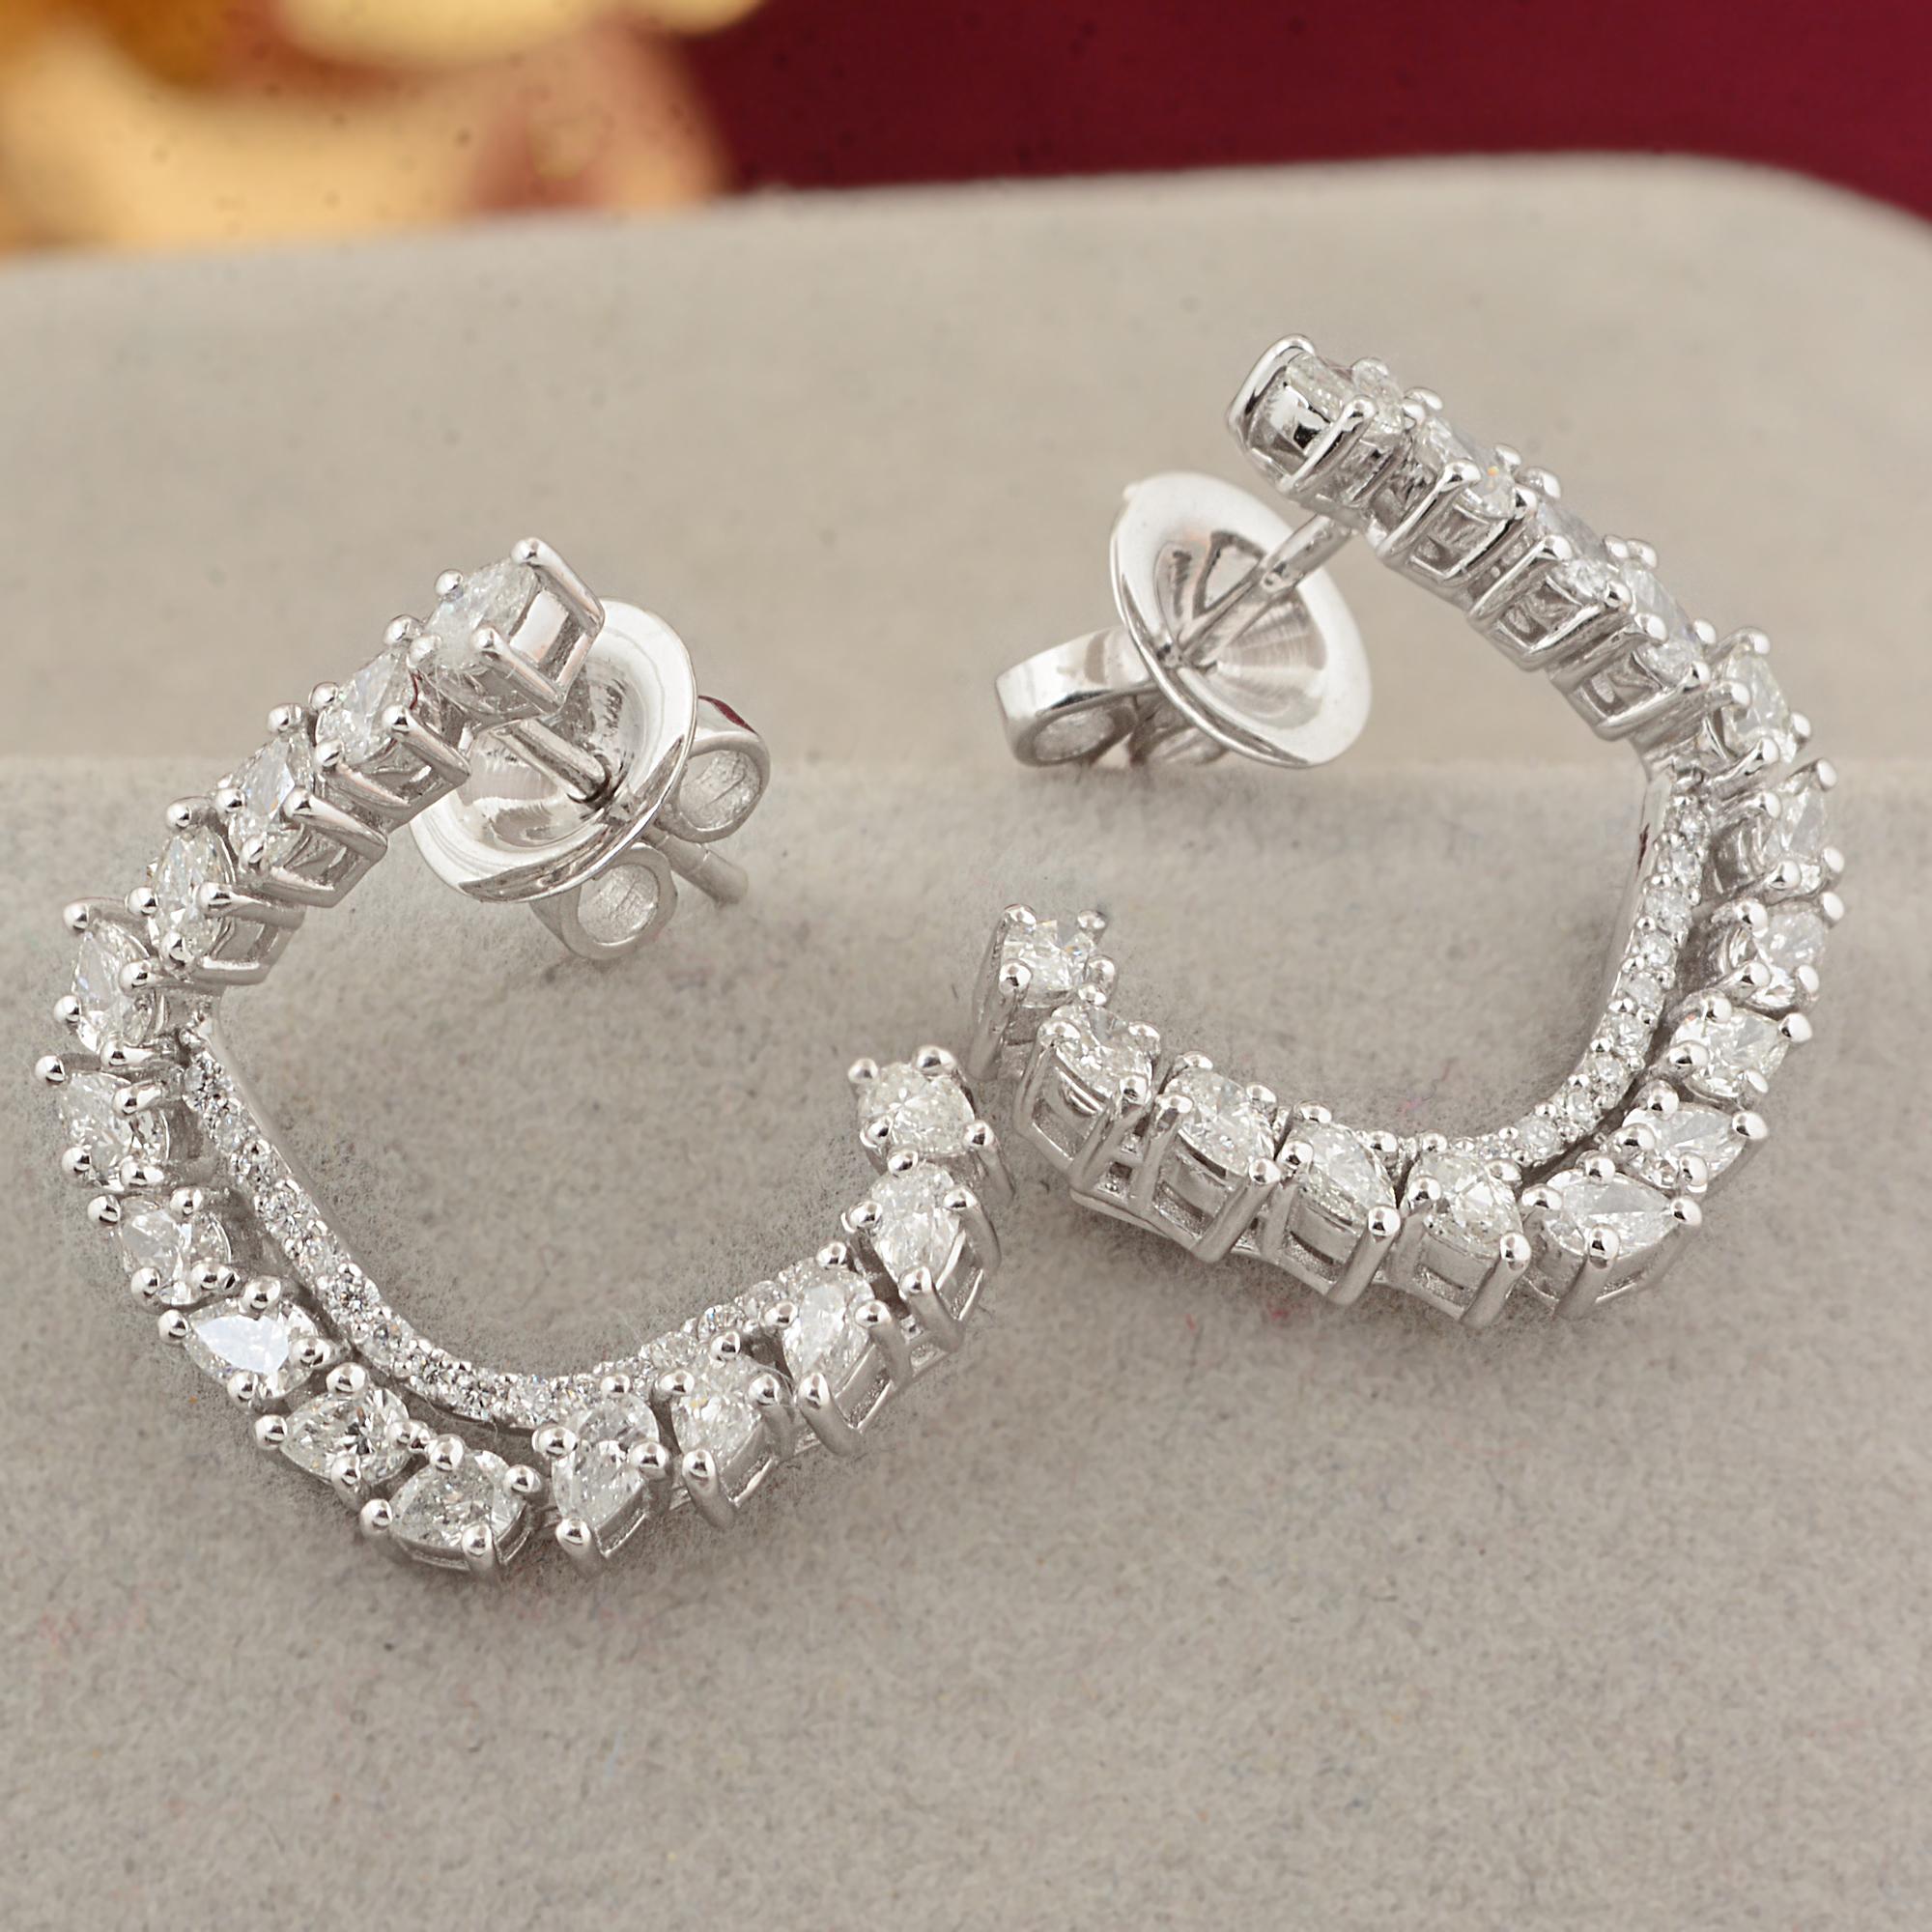 Item Code :- SEE-1996
Gross Weight :- 6.13 gm
18k White Gold Weight :- 5.76 gm
Diamond Weight :- 1.85 carat  ( AVERAGE DIAMOND CLARITY SI1-SI2 & COLOR H-I )
Earrings Length :- 19 mm approx.
✦ Sizing
.....................
We can adjust most items to